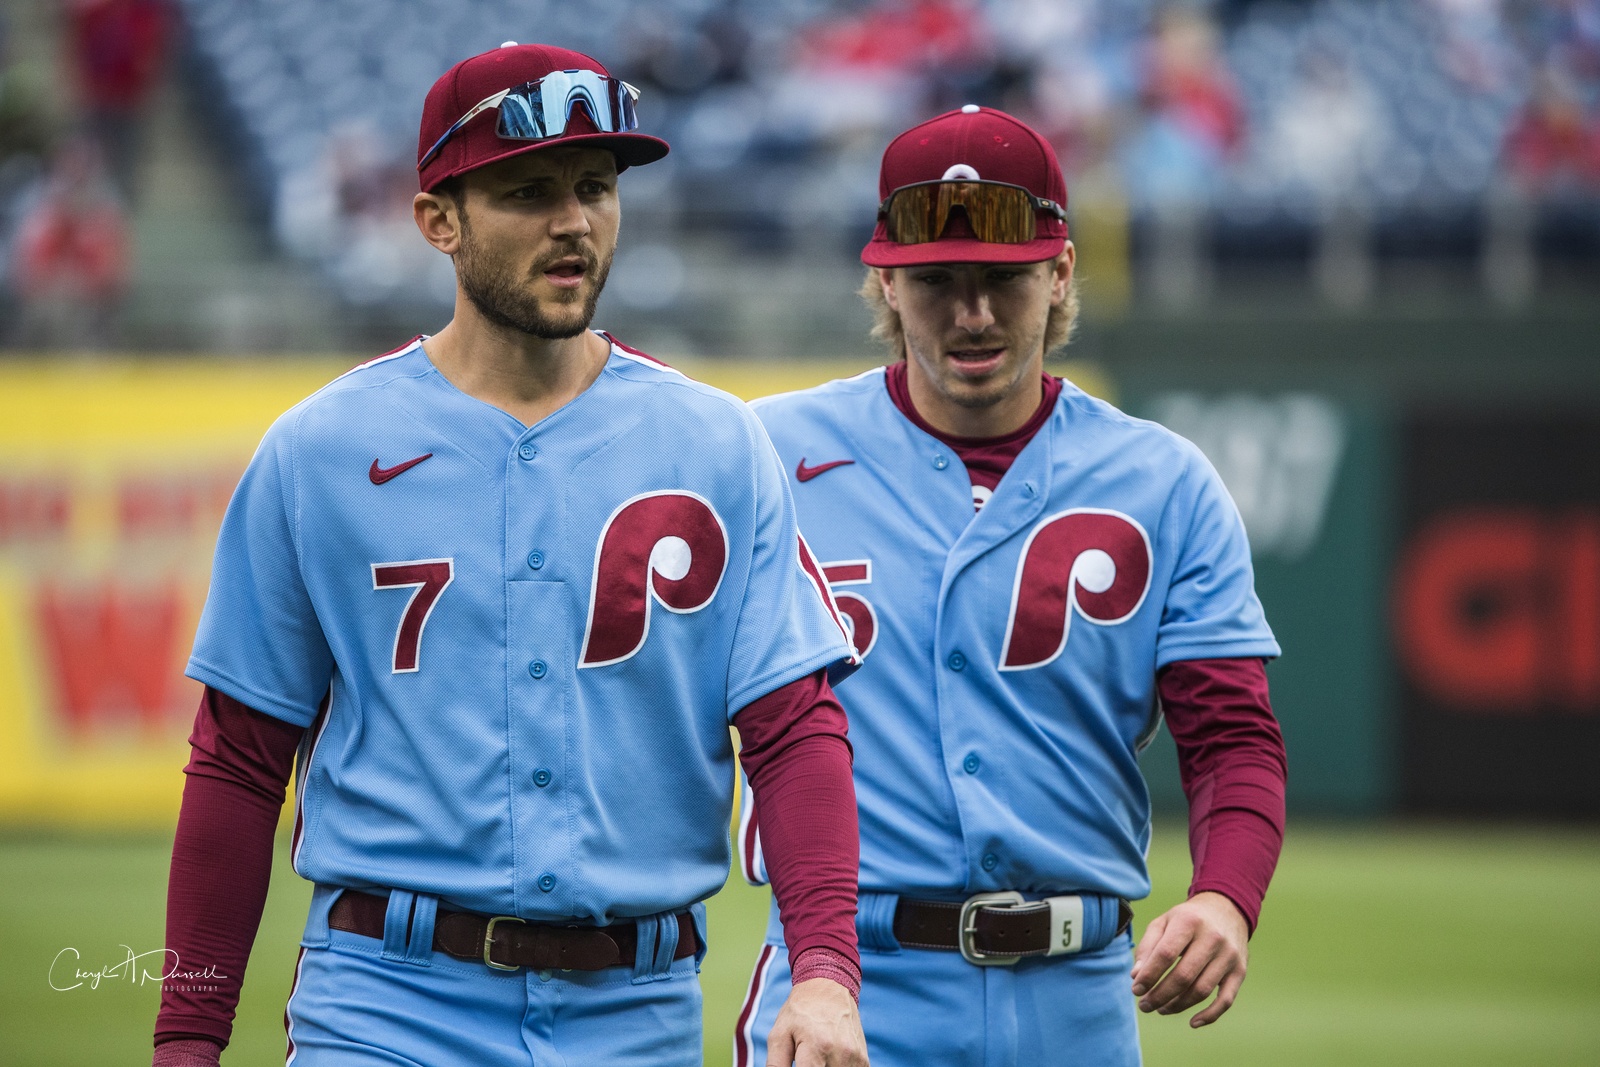 Phillies reportedly slated to play NL East rival in London in 2024   Phillies Nation - Your source for Philadelphia Phillies news, opinion,  history, rumors, events, and other fun stuff.